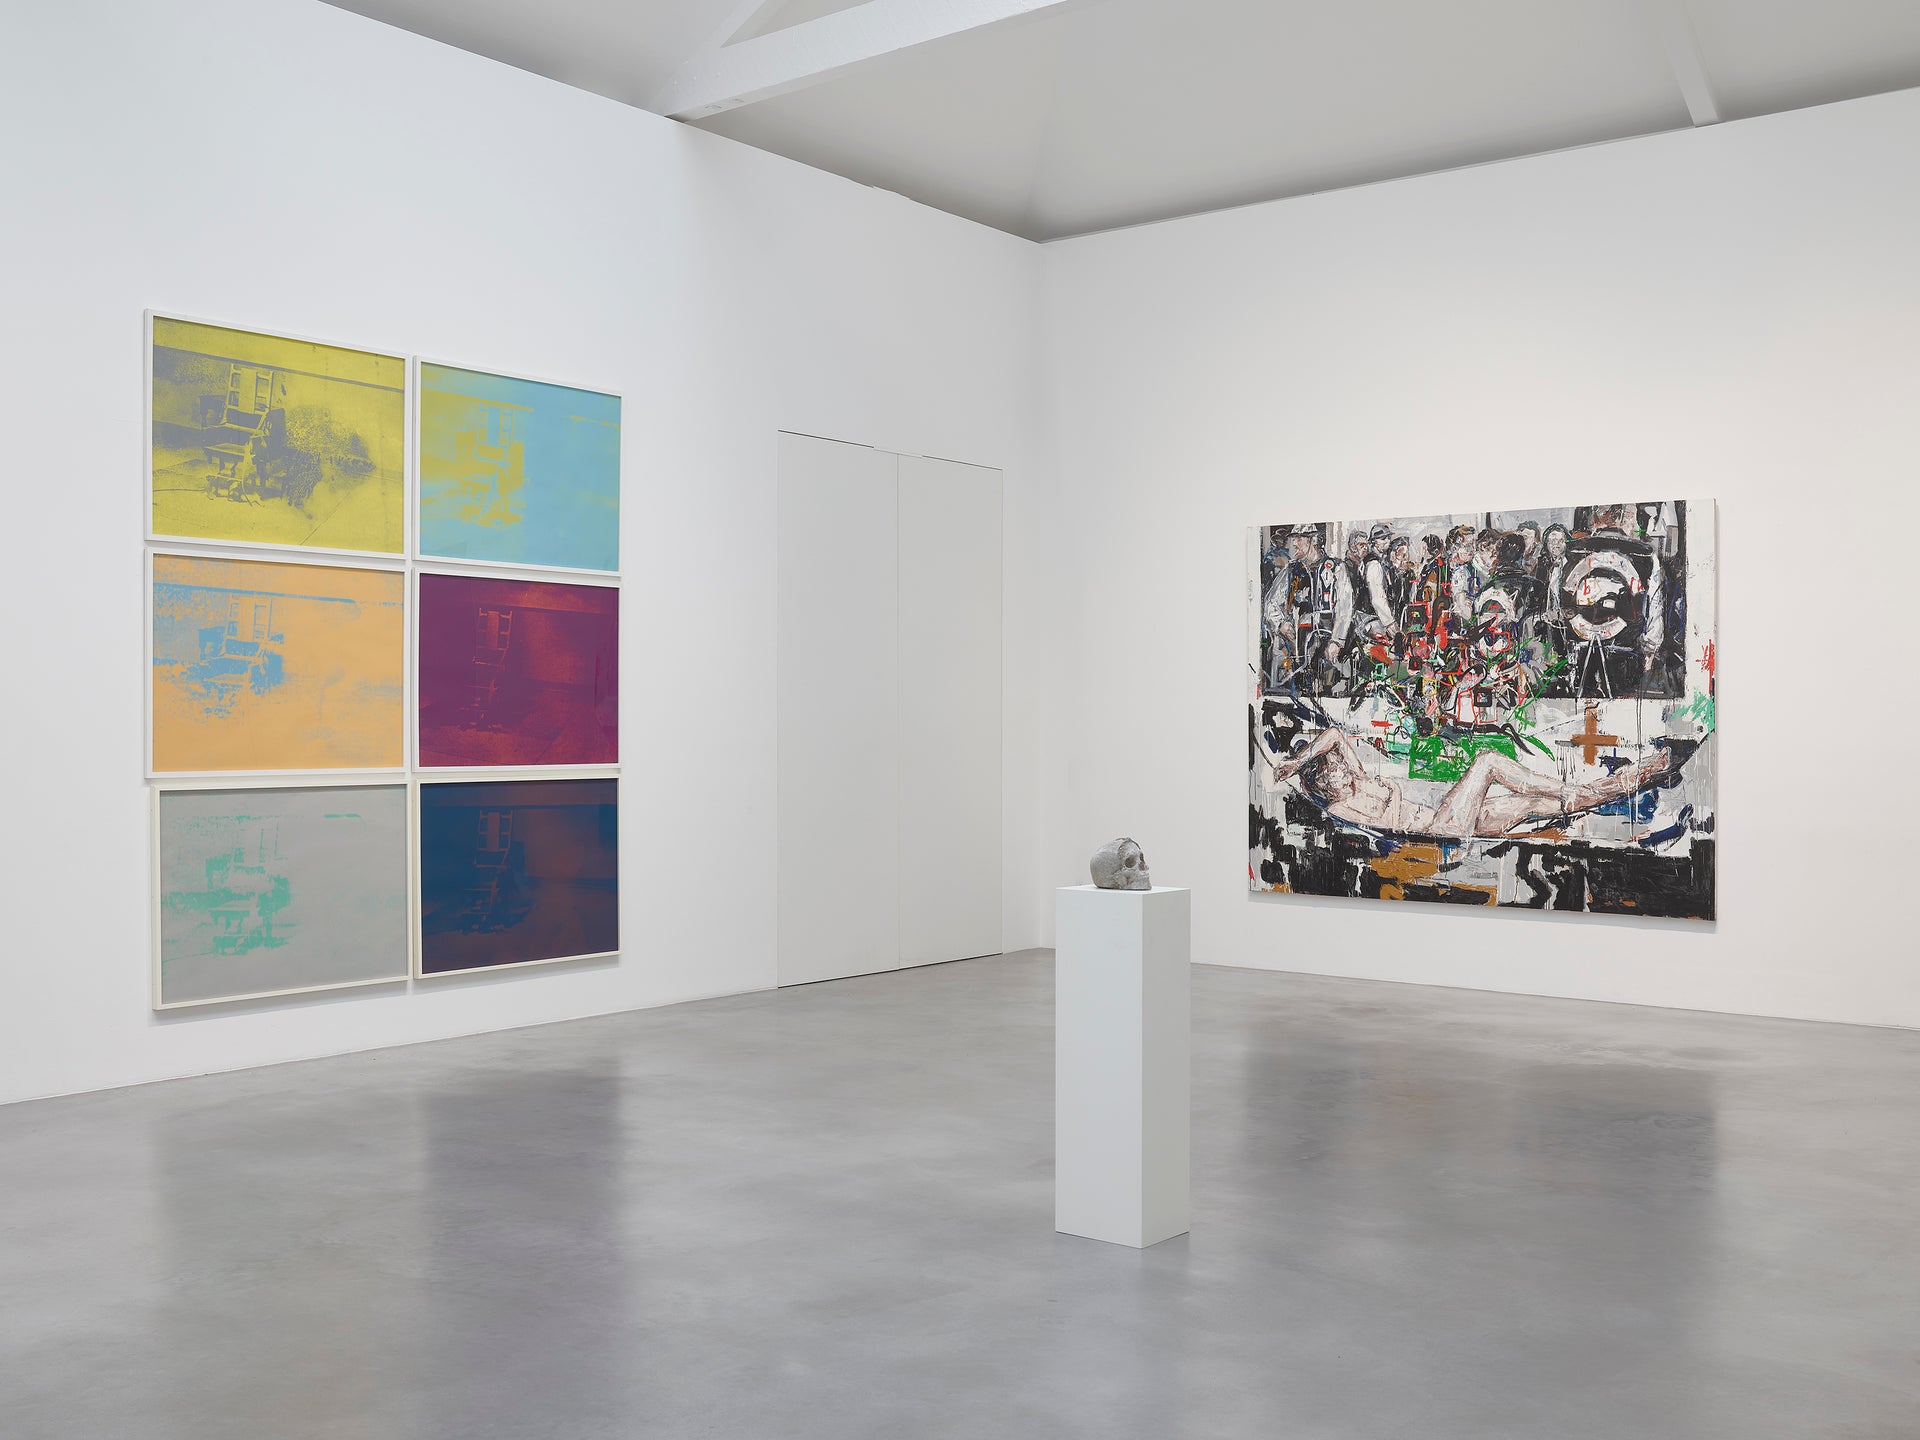 John Copeland and Wes Lang participates in a group EXHIBITION OF WORKS FROM DAMIEN HIRST’S COLLECTION alongside FRANCIS BACON, BANKSY, GEORG BASELITZ and more